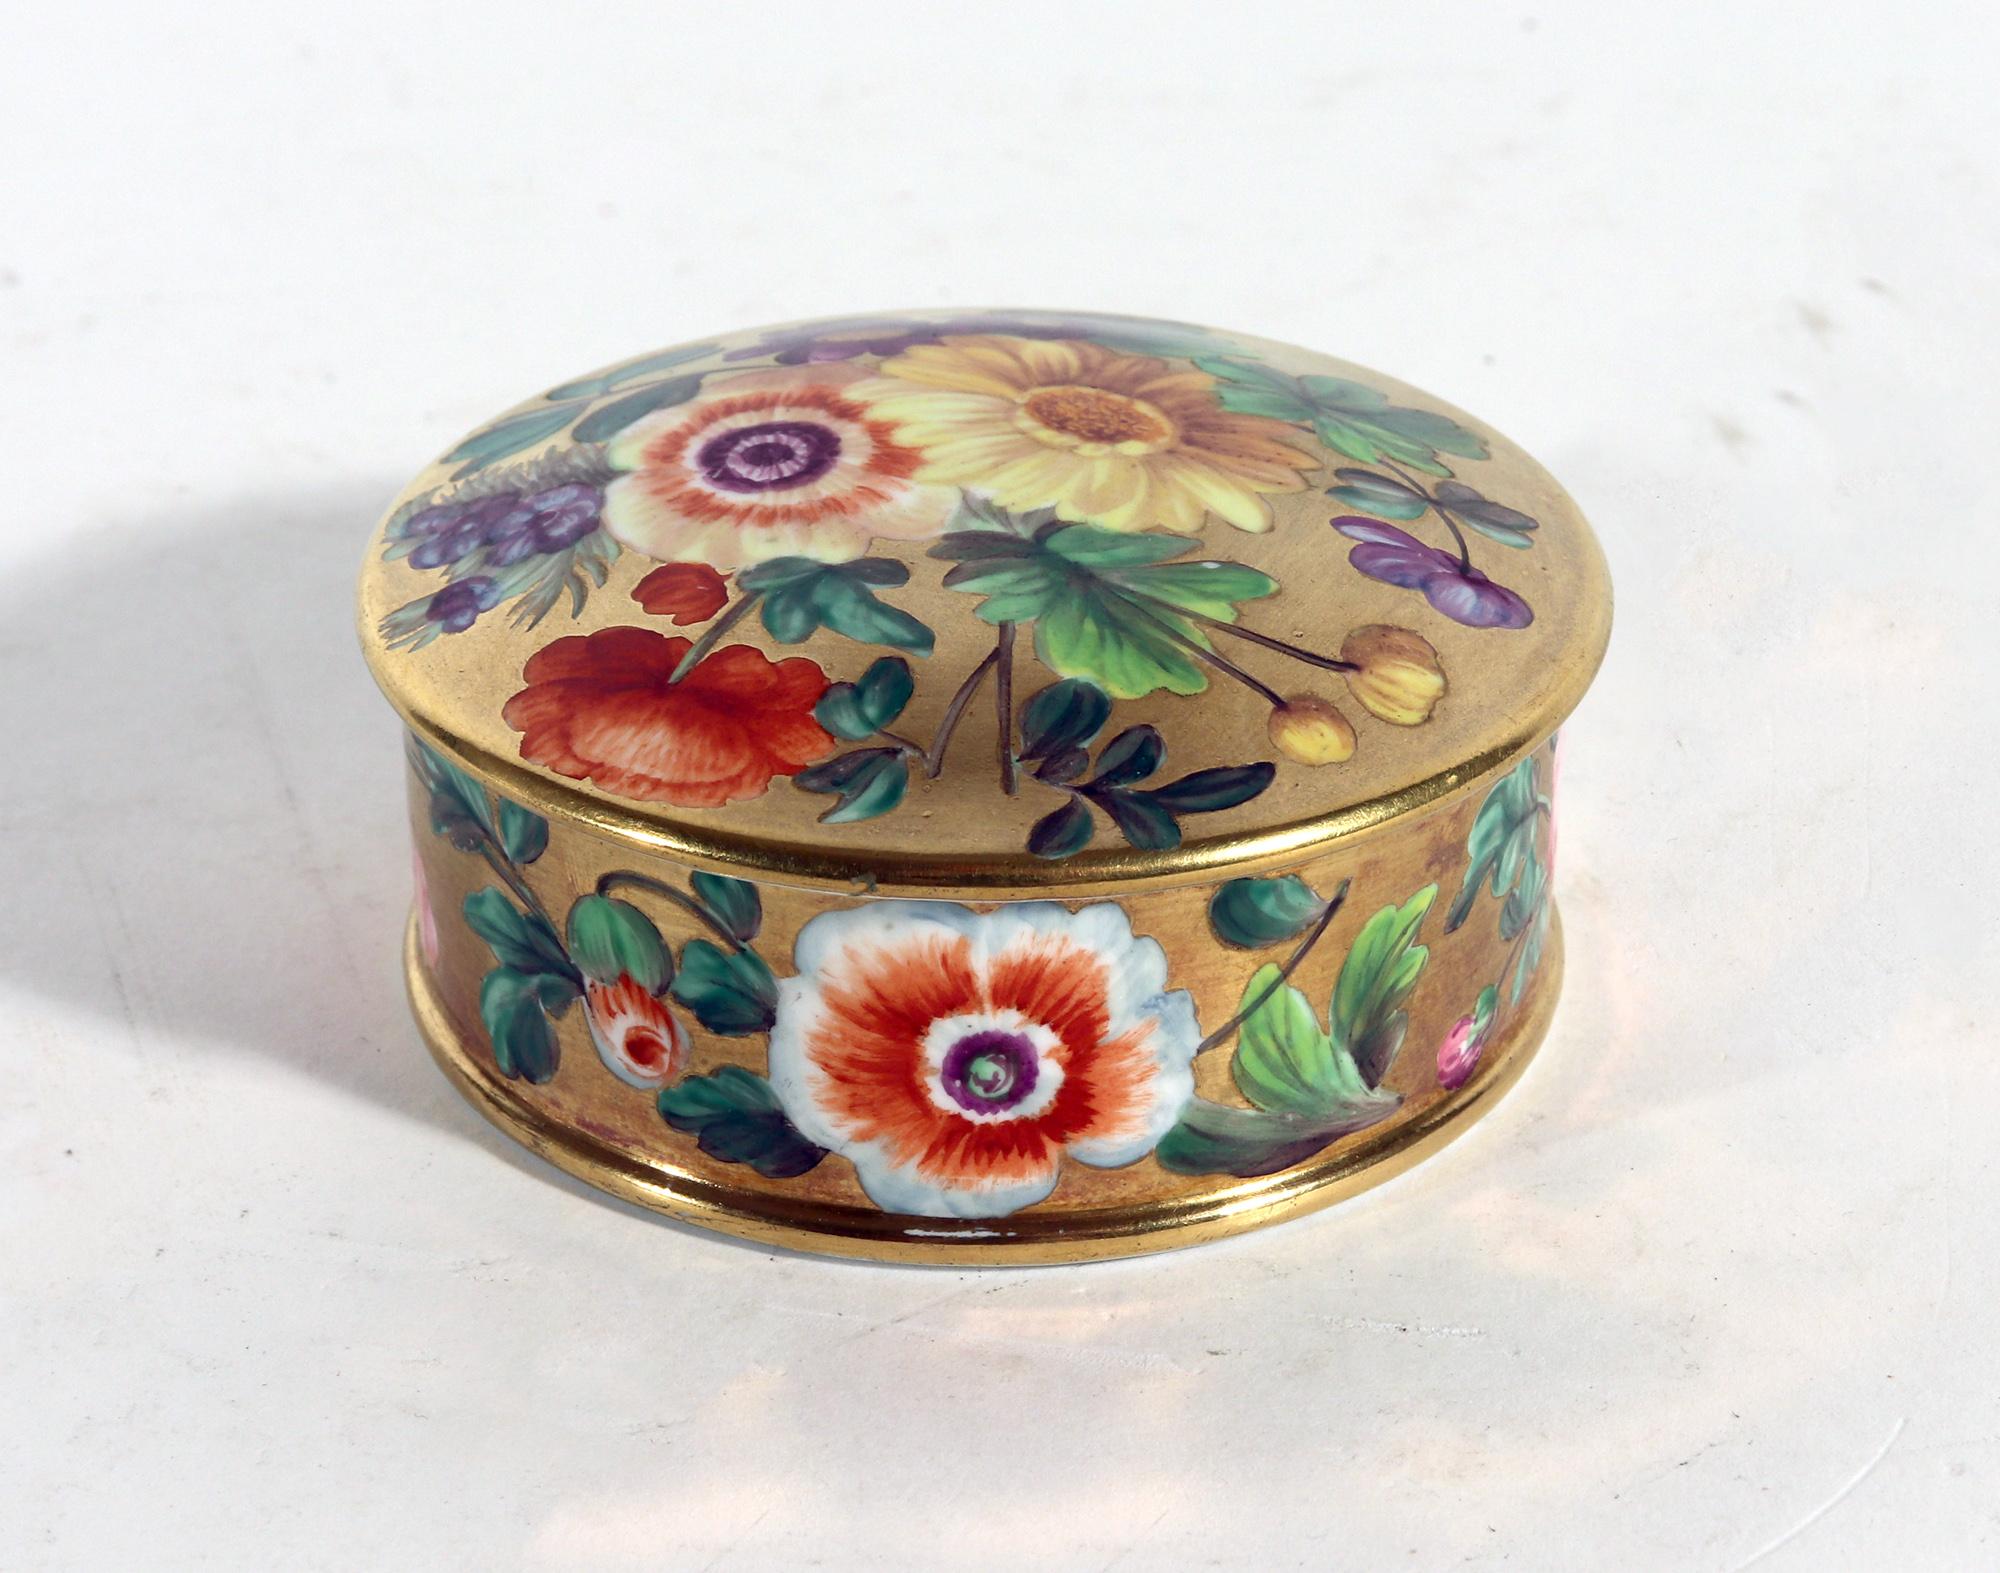 English Porcelain Patch Box with Irish References, 